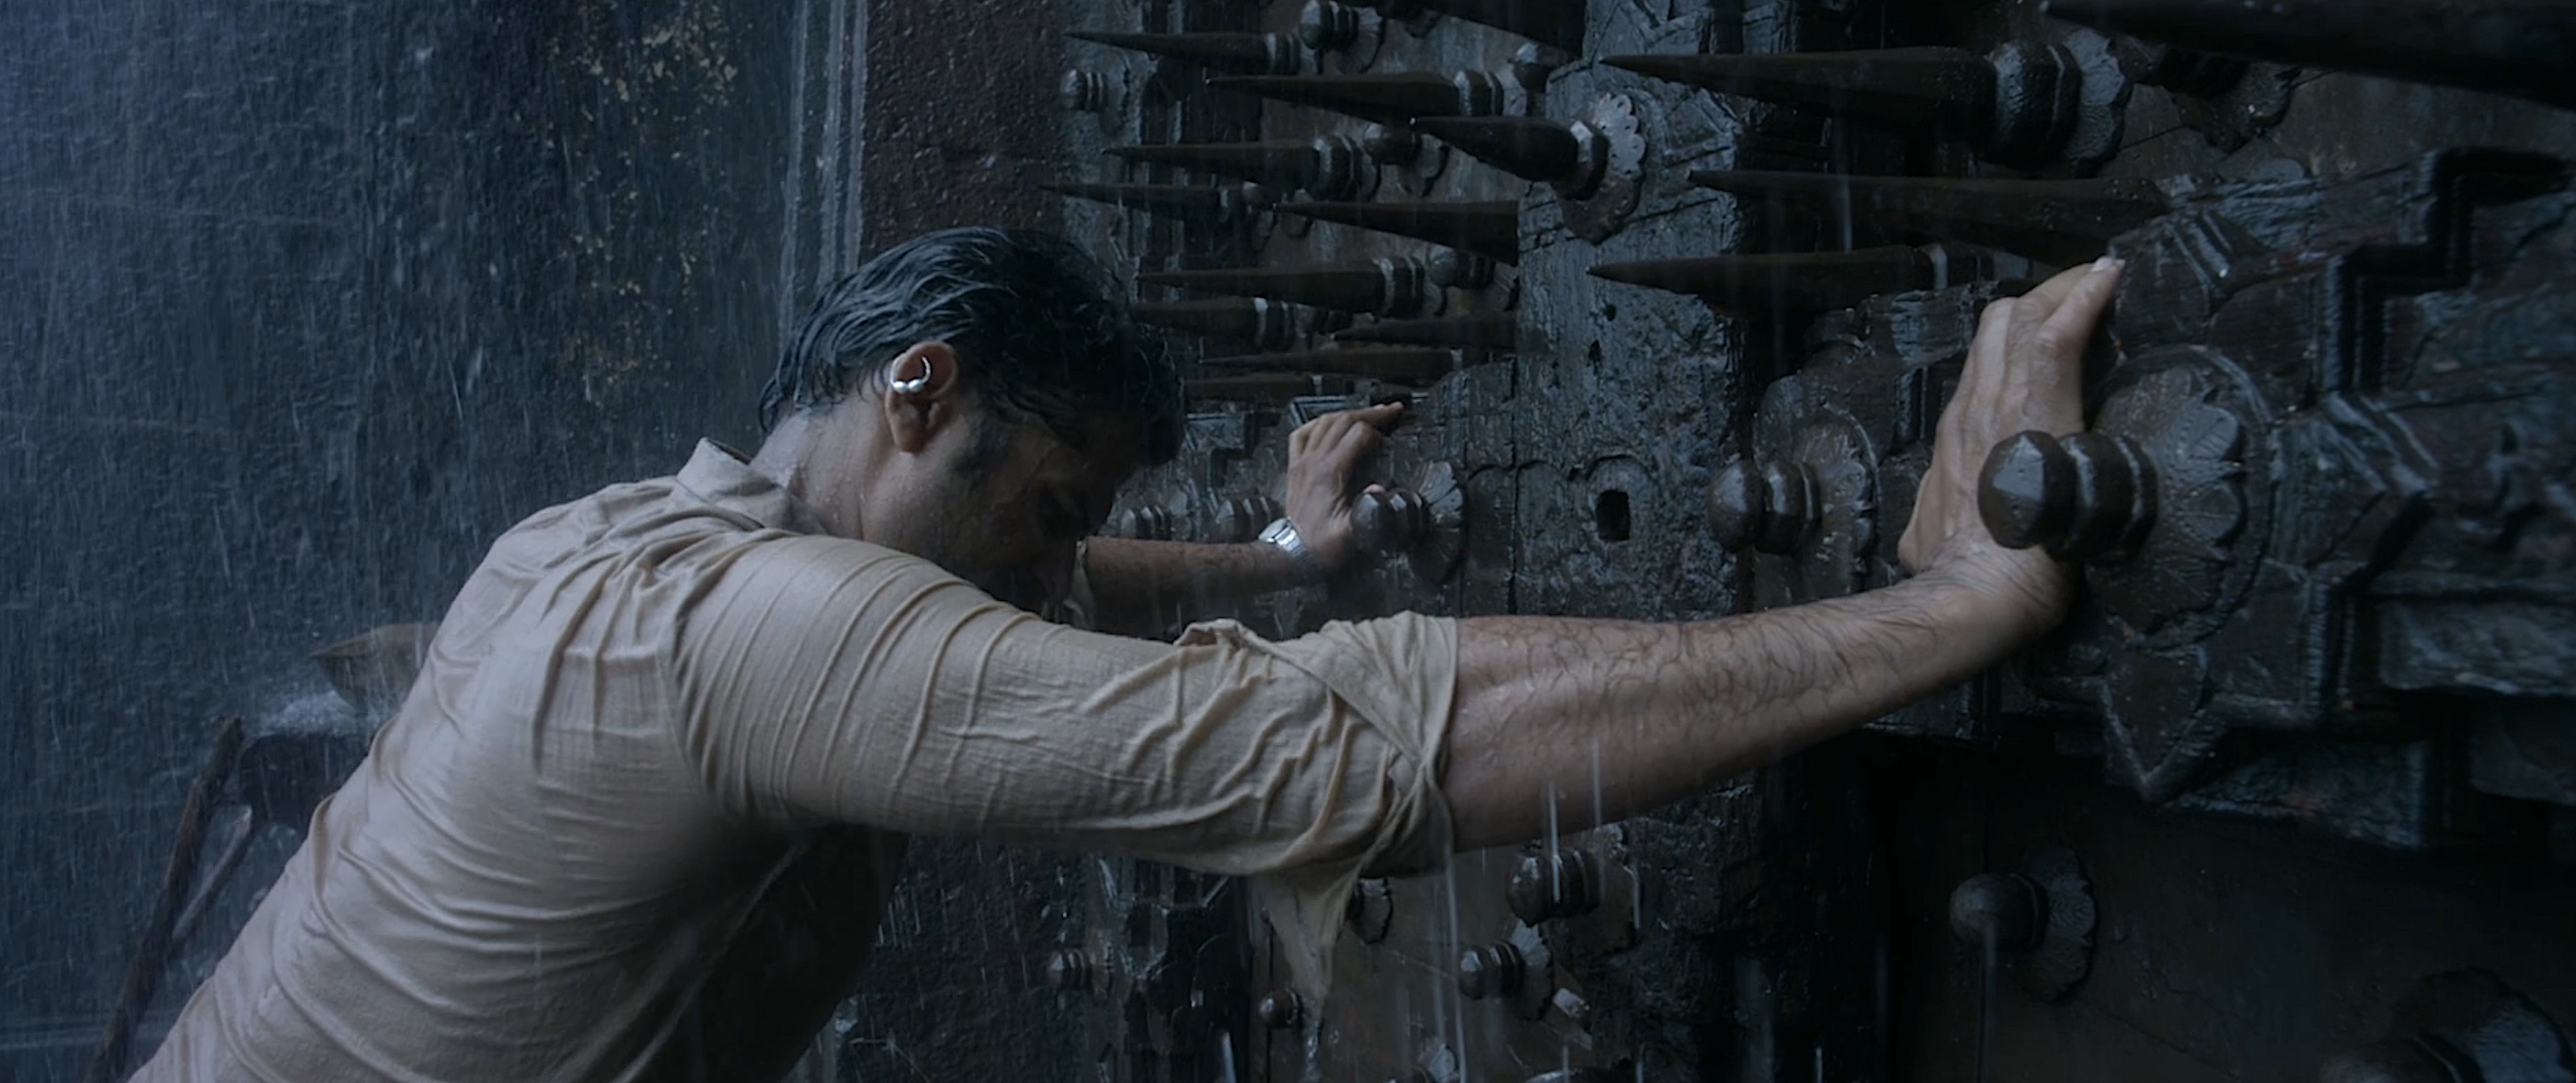 Vinayak (Sohum Shah) stands in drenching rain and throws his body weight against a giant metal door covered with vicious spikes in Tumbbad